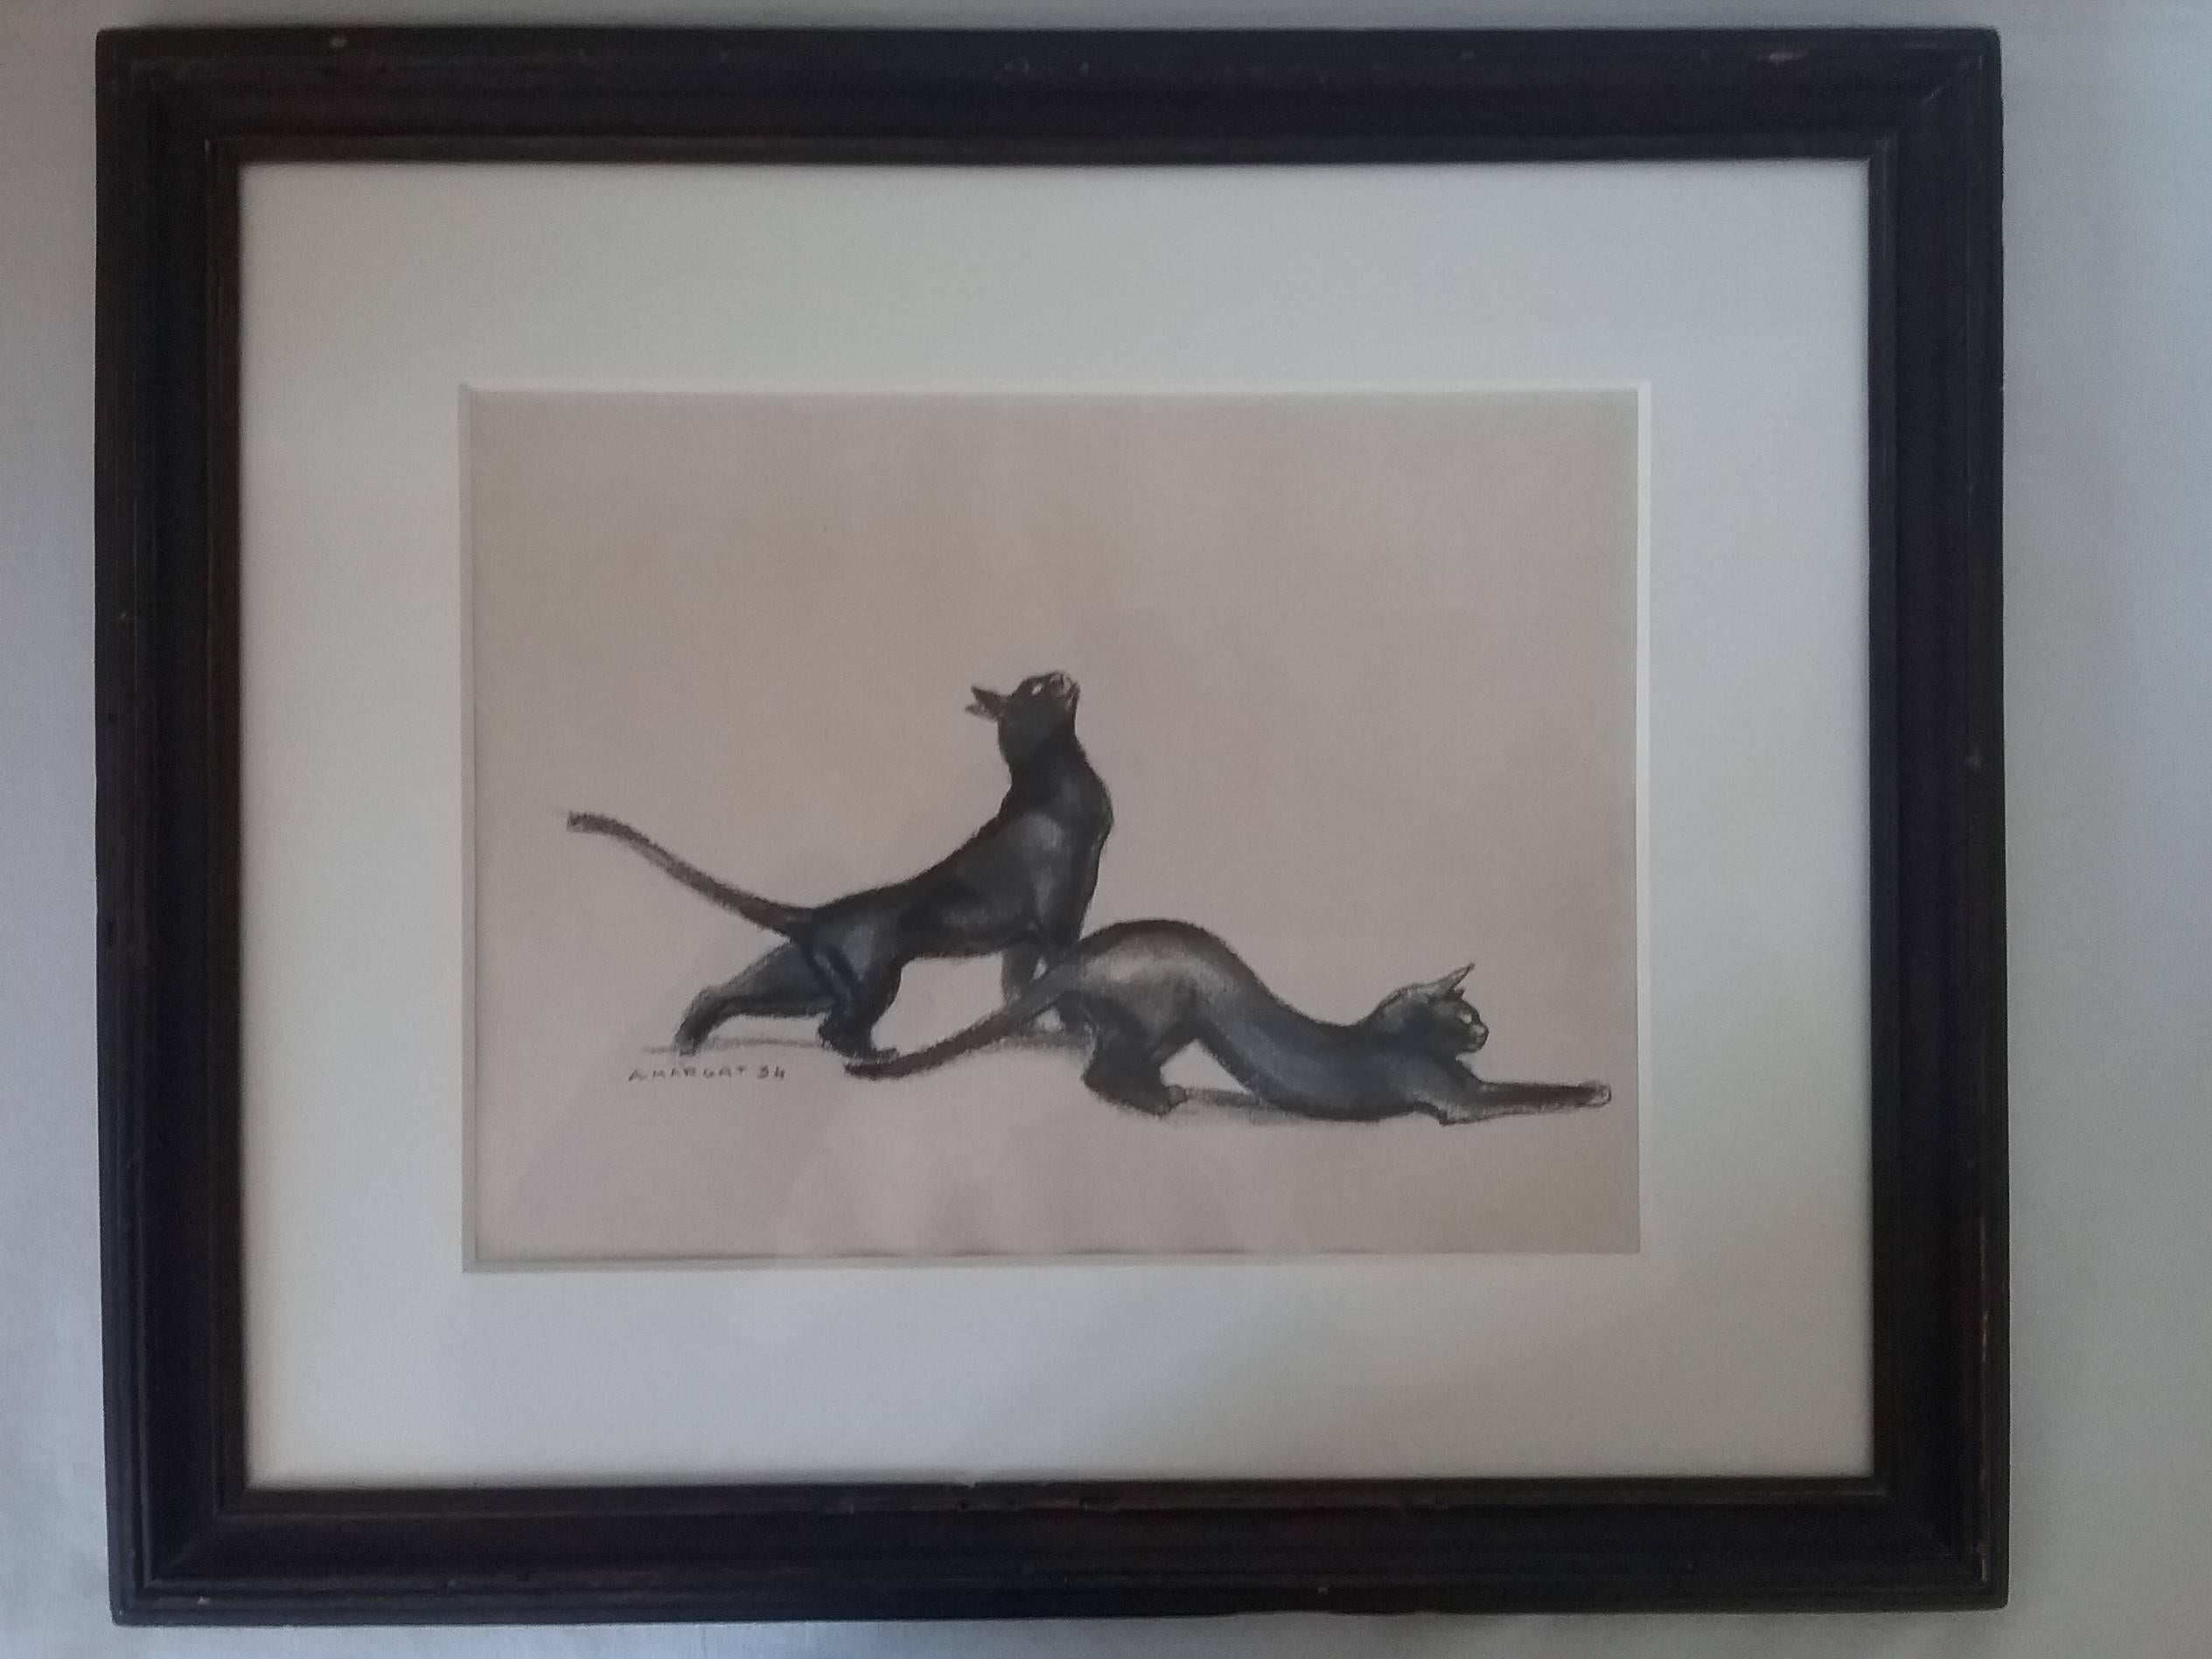 Rare drawing of a couple of cats by André Margat. Signed and dated in the bottom to the left
Black pencil and charcoal on yellowish brown paper
Detached dimensions : H 8.66 in, W 11.42 in
with wooden frame: H 15.35 in, W 8.11 in

Antic wooden